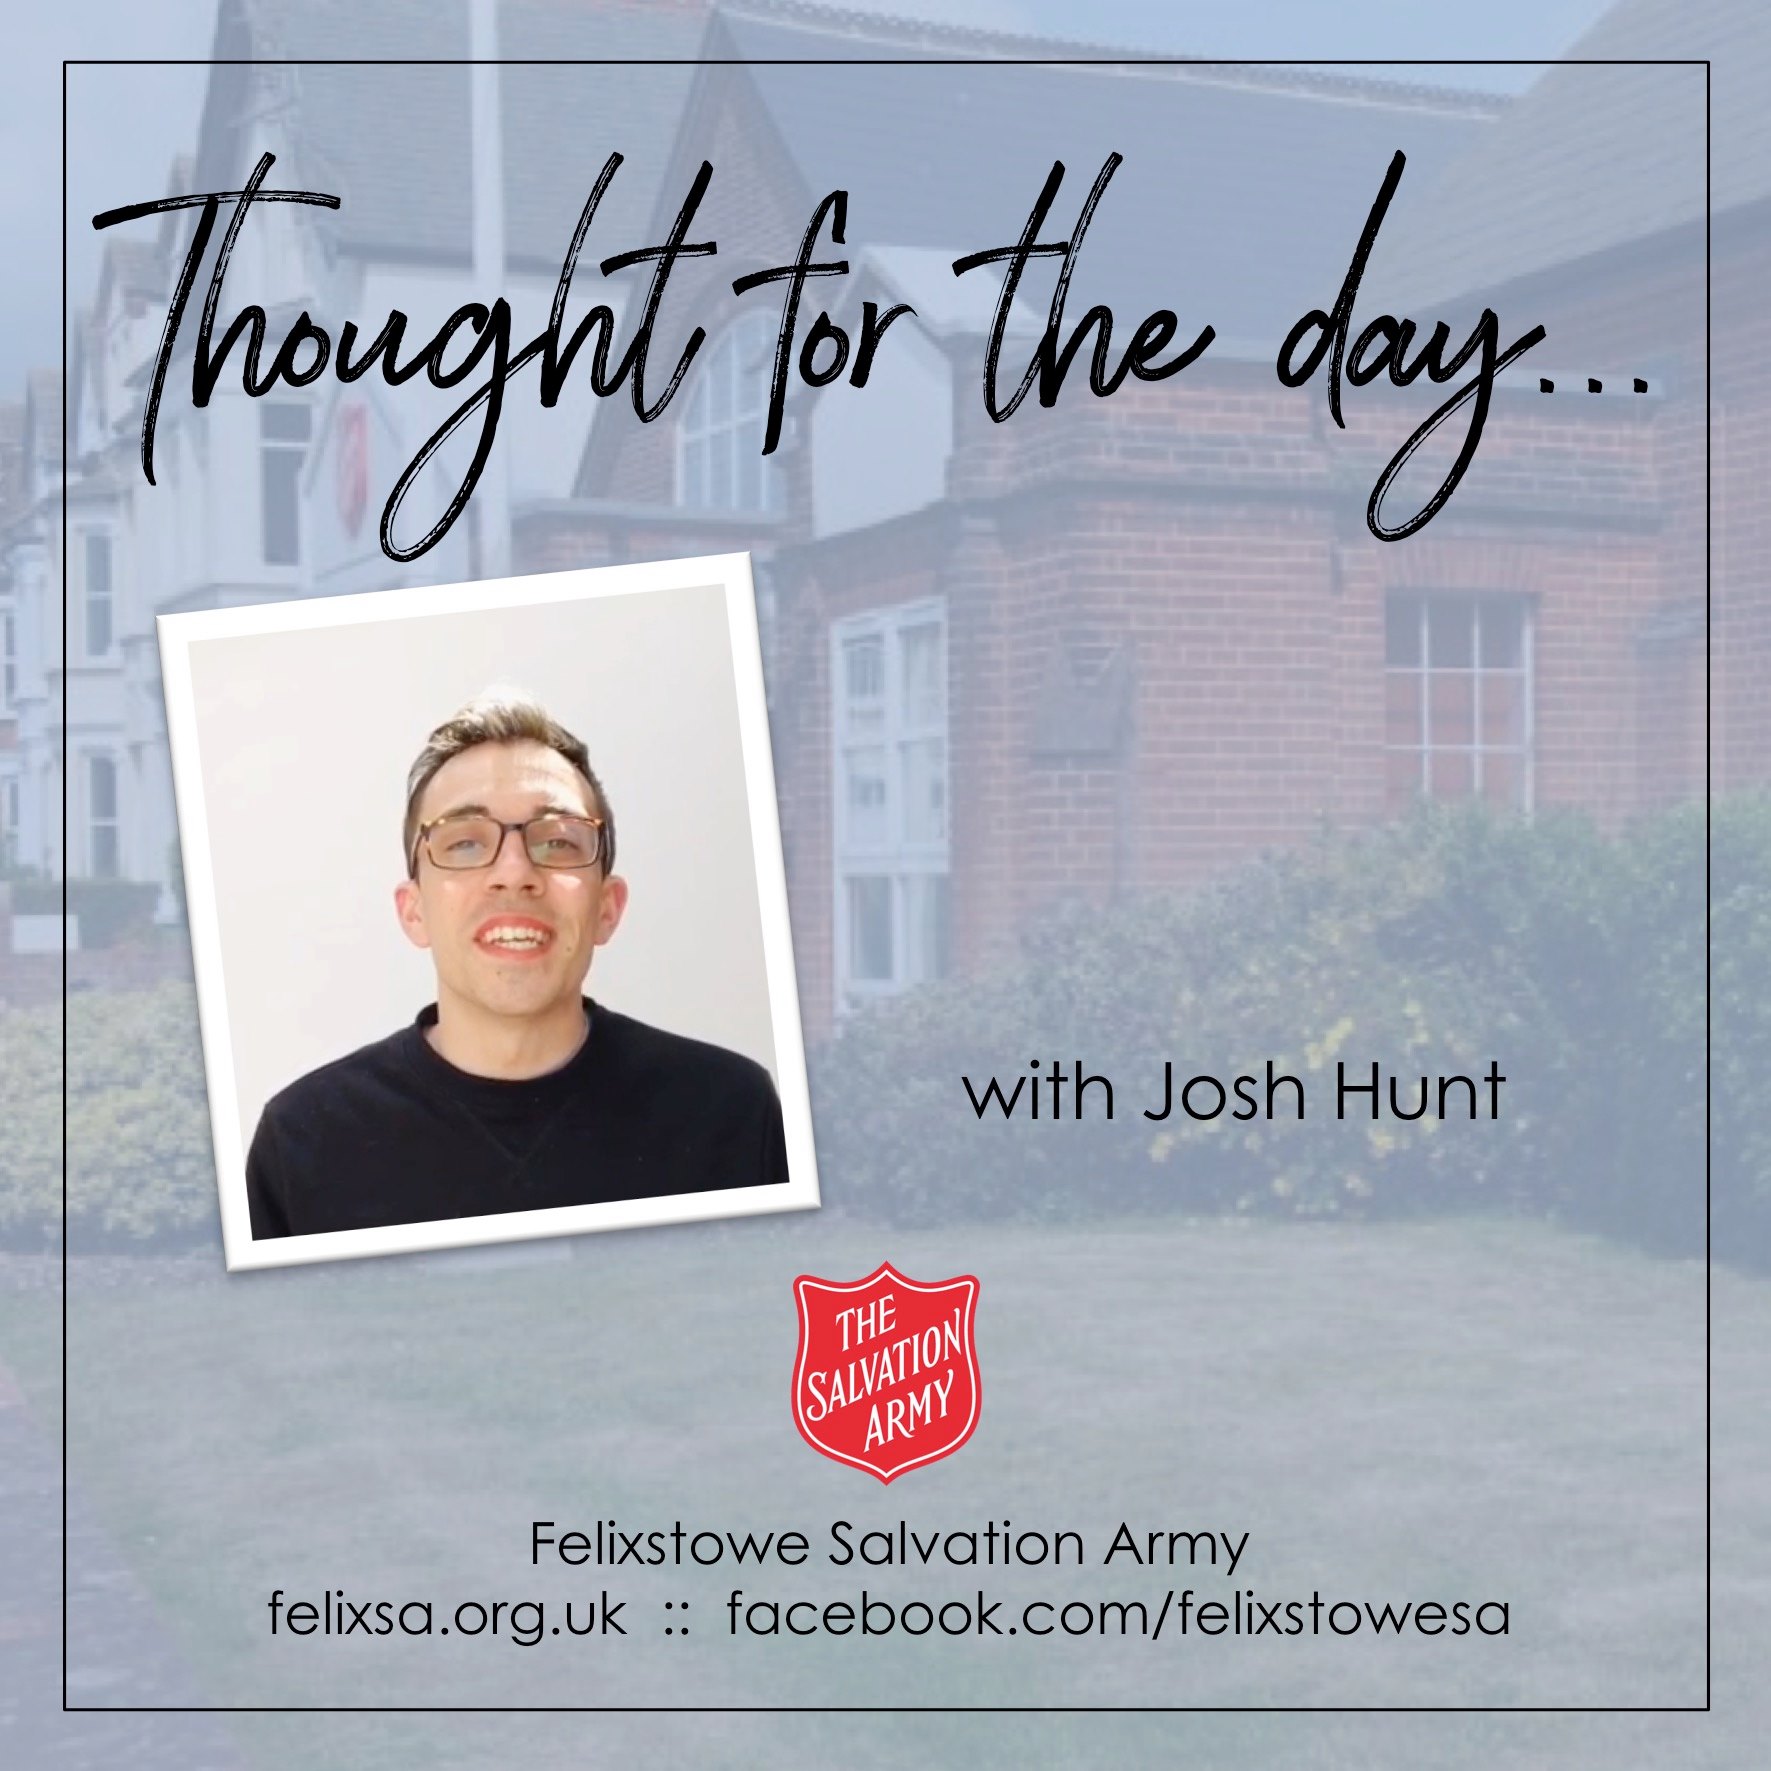 Thought for the Day with Josh Hunt